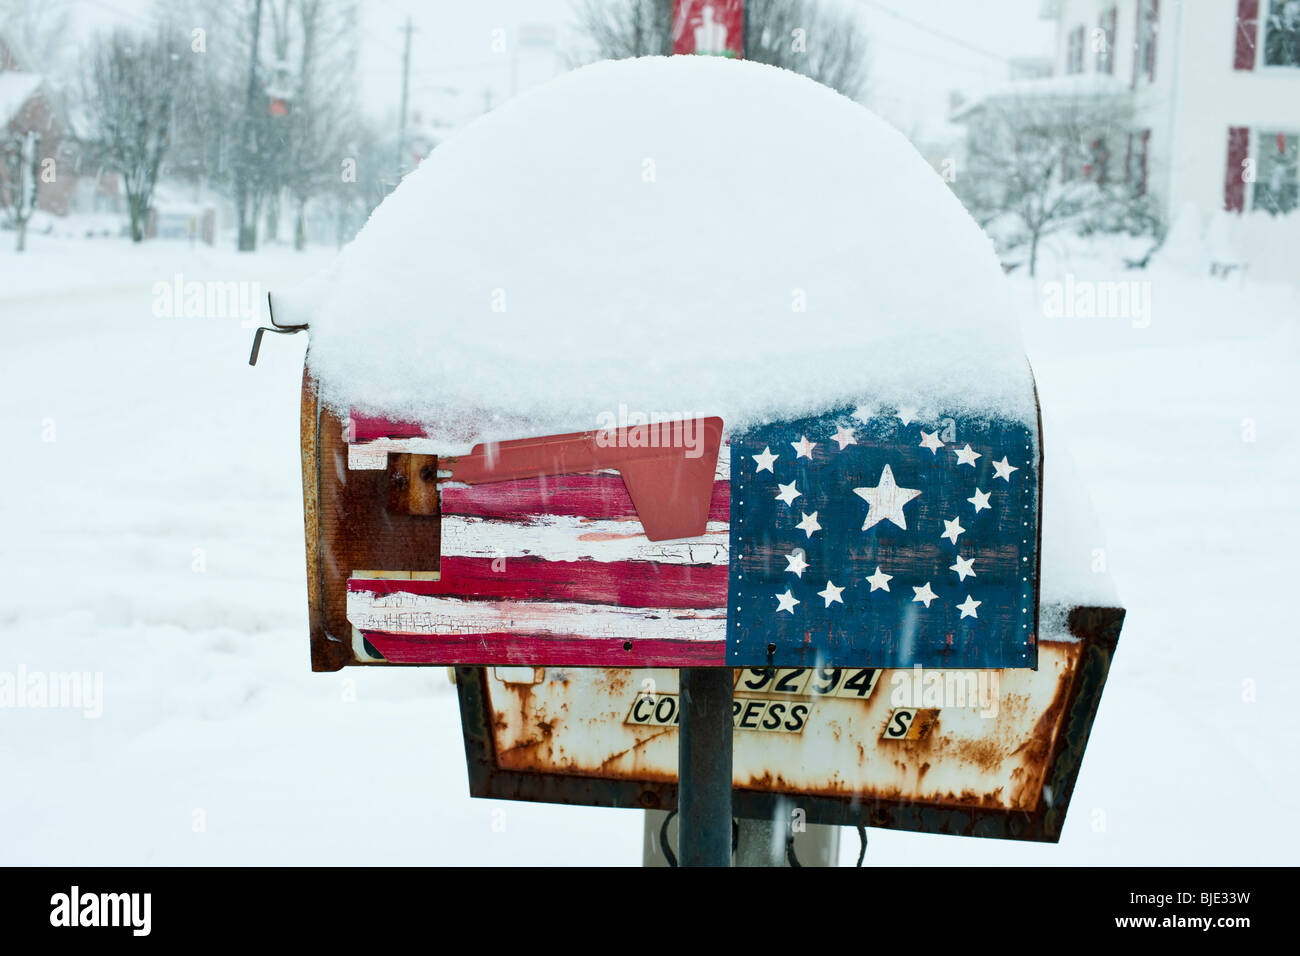 US style letter box with stars and stripes design covered in snow. Stock Photo